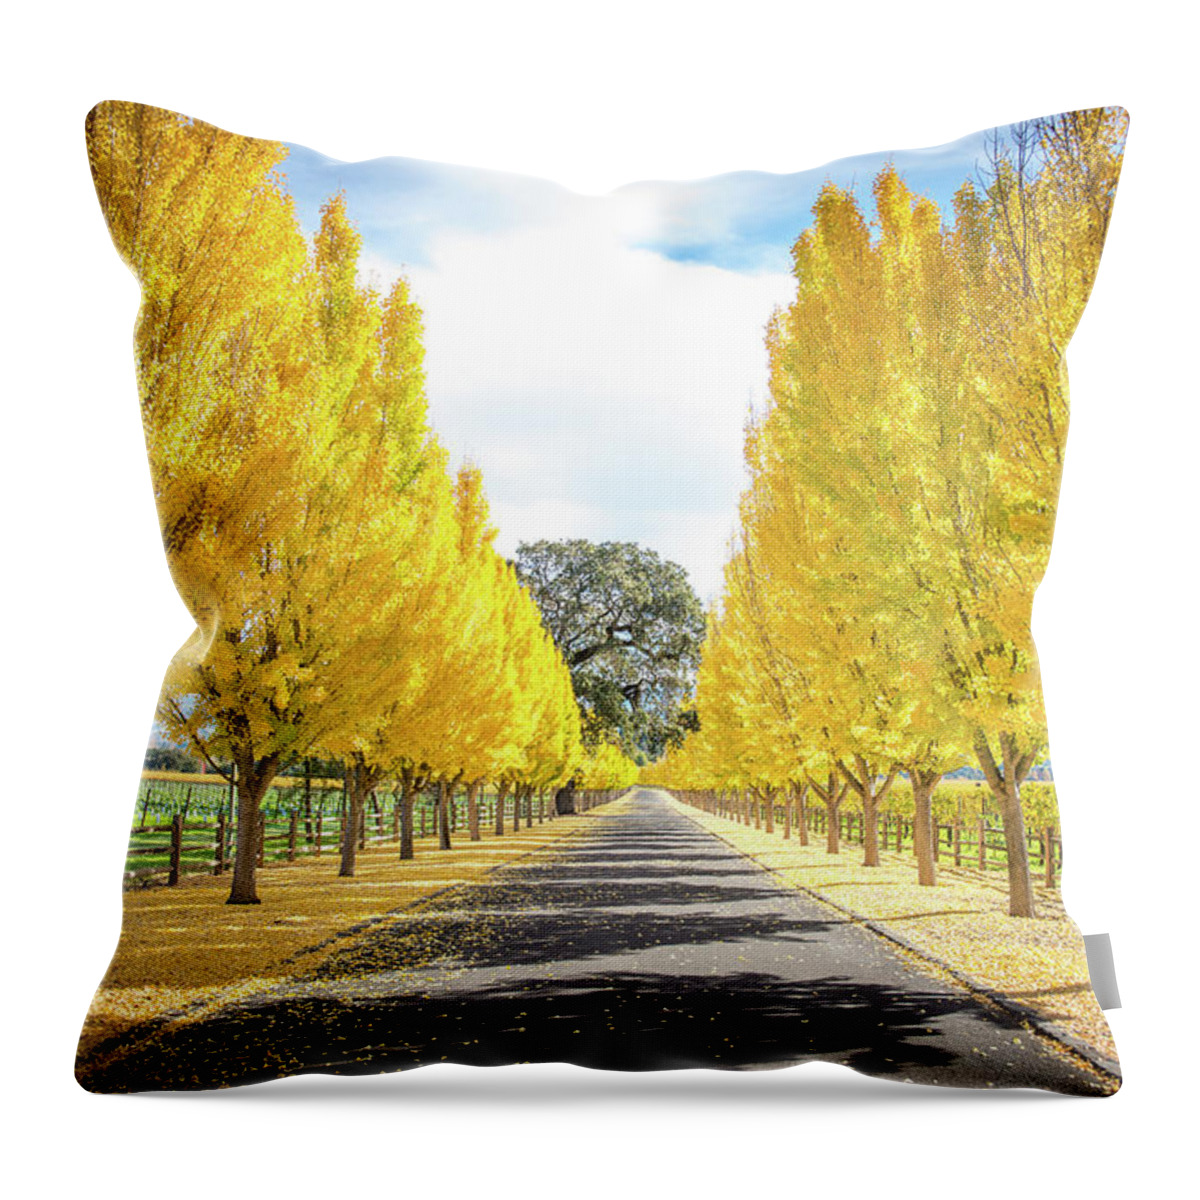 Far Niente Winery Throw Pillow featuring the photograph Far Niente Driveway by Aileen Savage